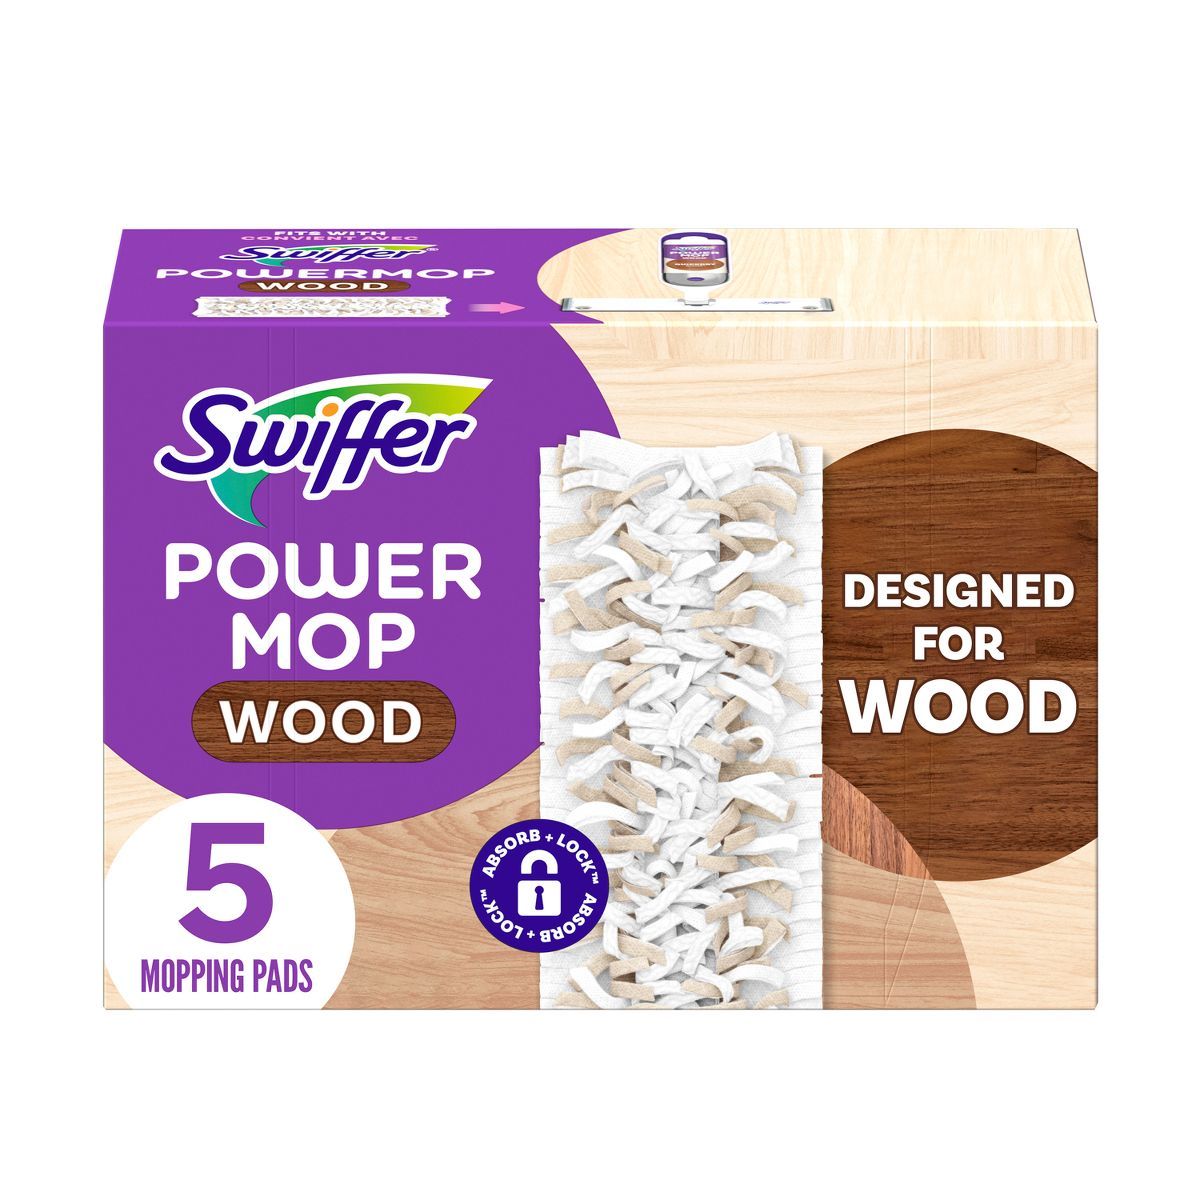 Swiffer Power Mop Wood Mopping Pad Refills for Floor Cleaning | Target